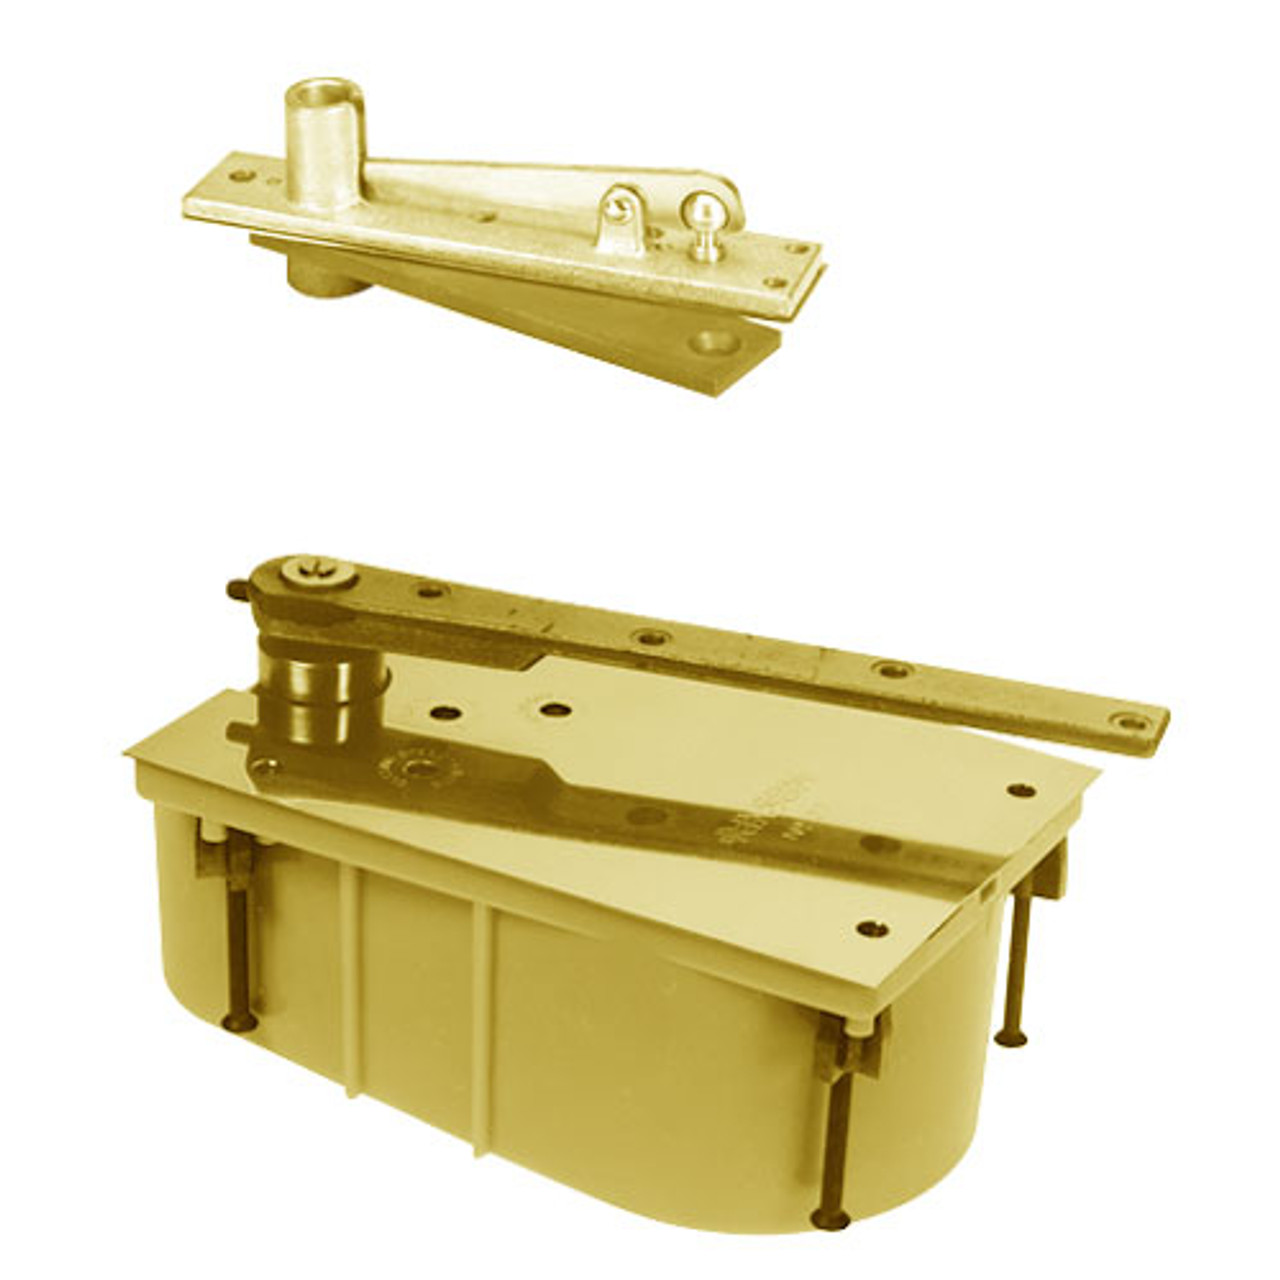 28-95N-554-LFP-RH-605 Rixson 28 Series Heavy Duty Single Acting Center Hung Floor Closer with Concealed Arm in Bright Brass Finish